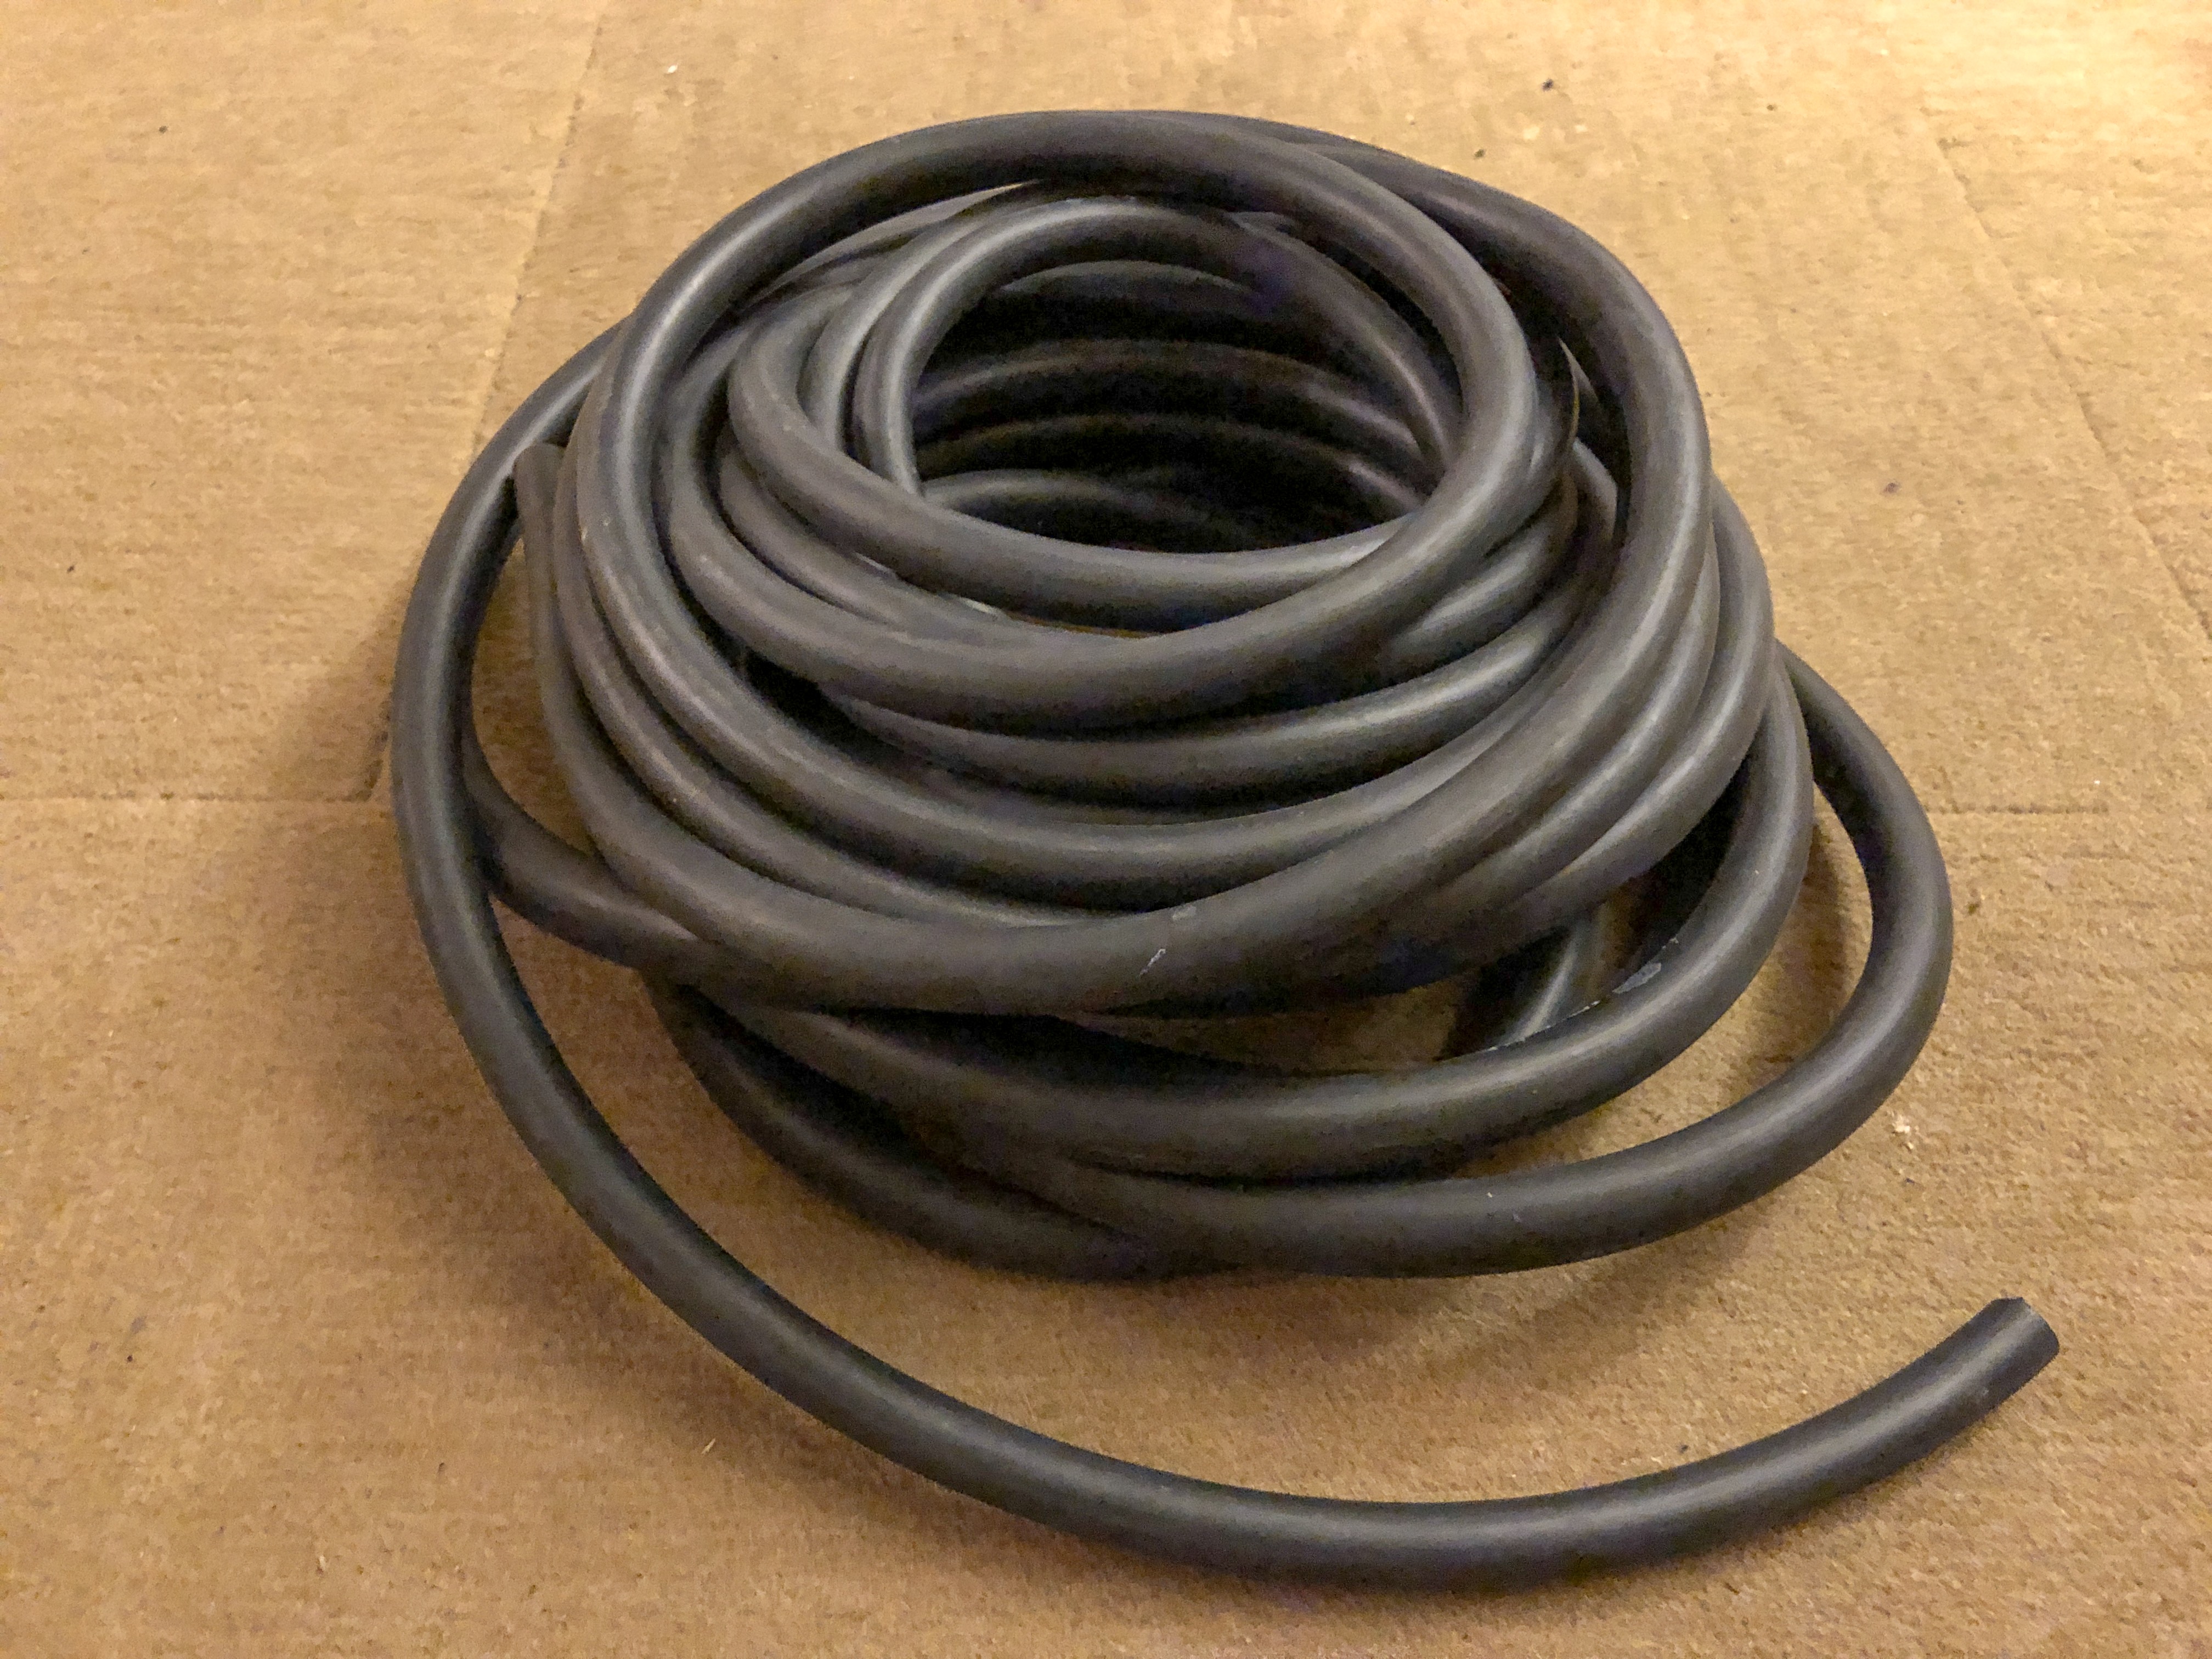 New hoses for the Lomo tank